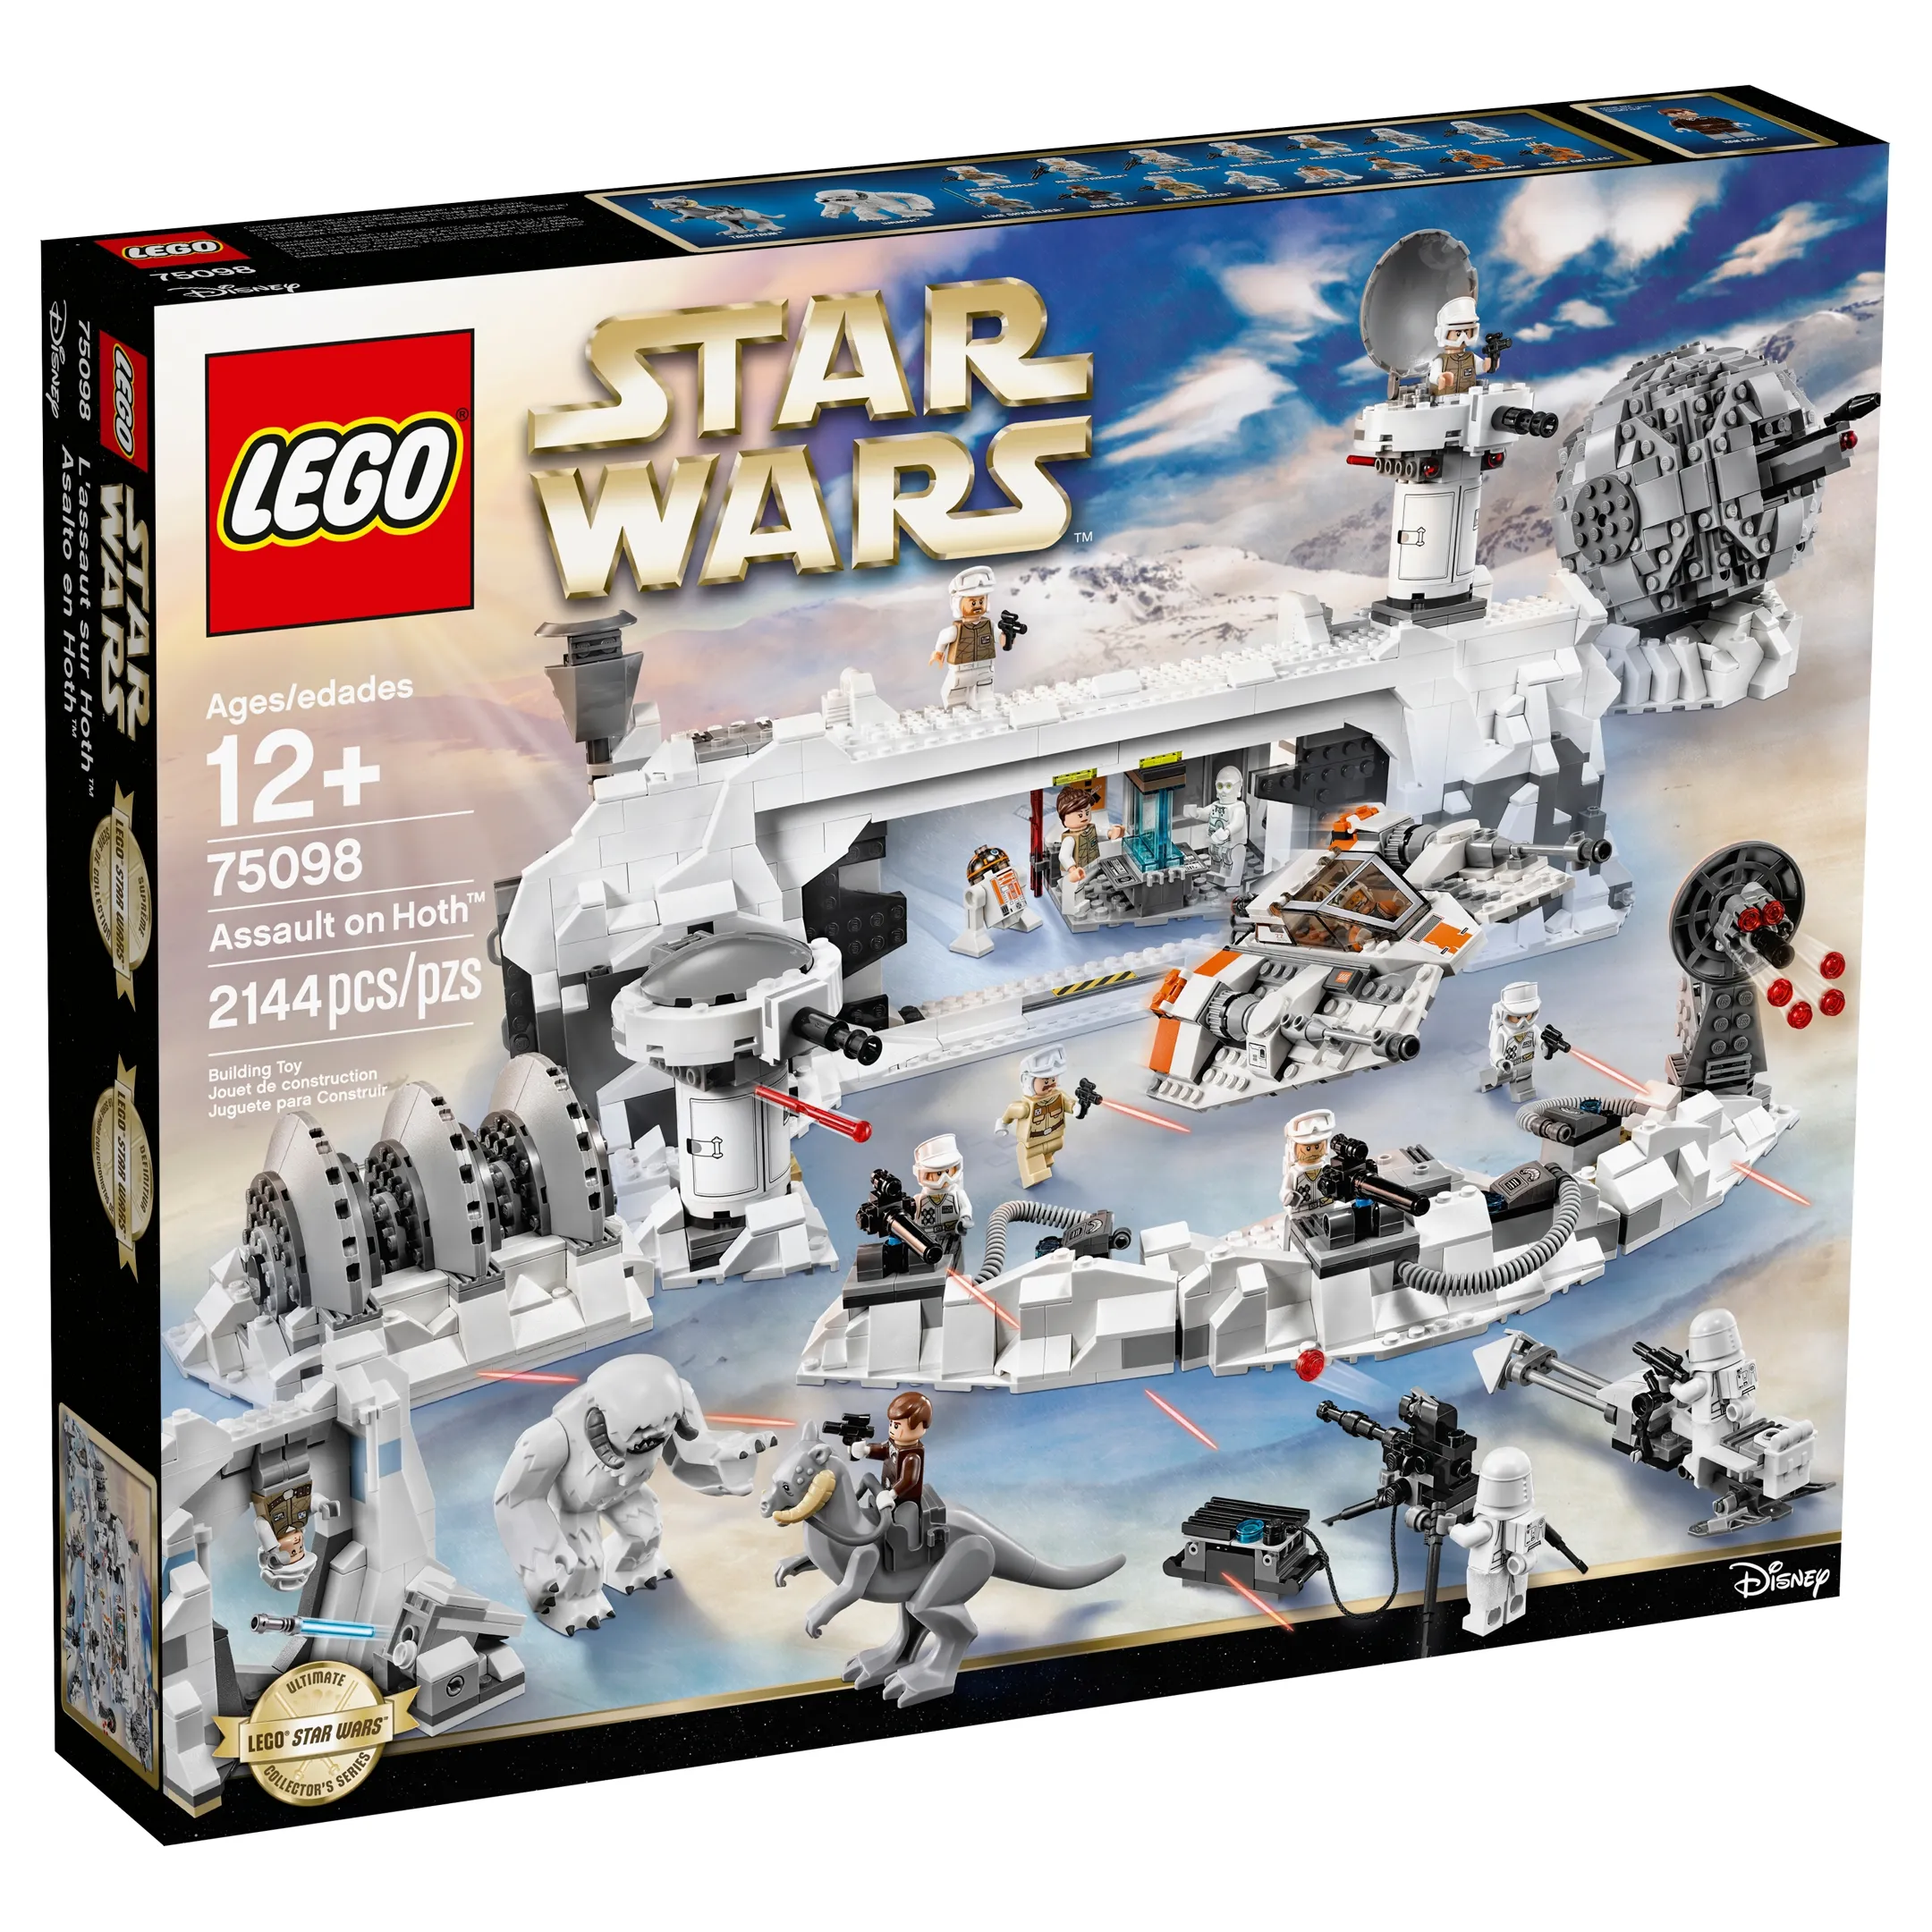 Star Wars™ UCS Assault on Hoth Gallery